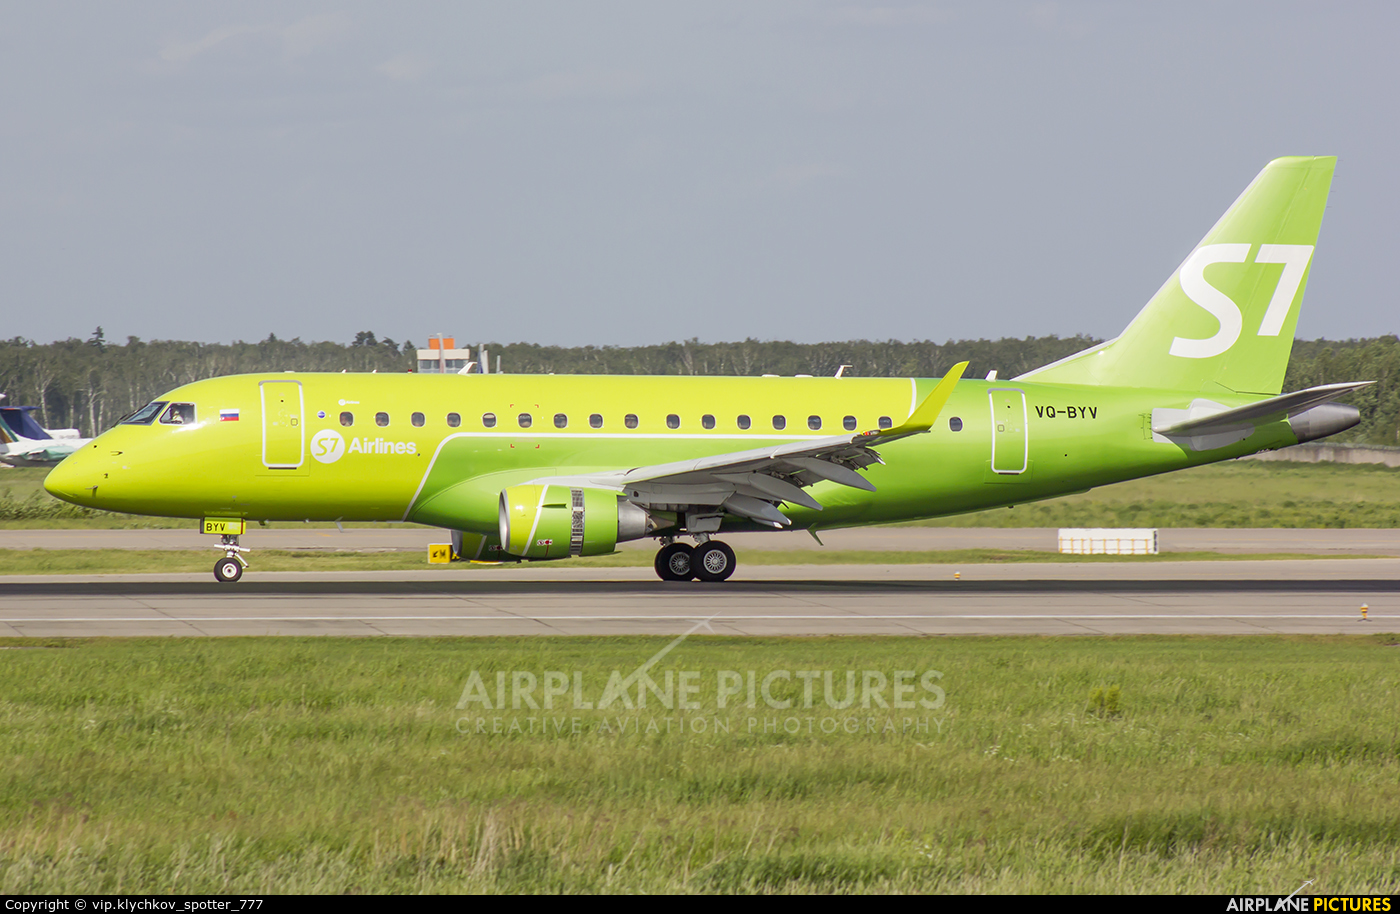 S7 Airlines VQ-BYV aircraft at Moscow - Domodedovo